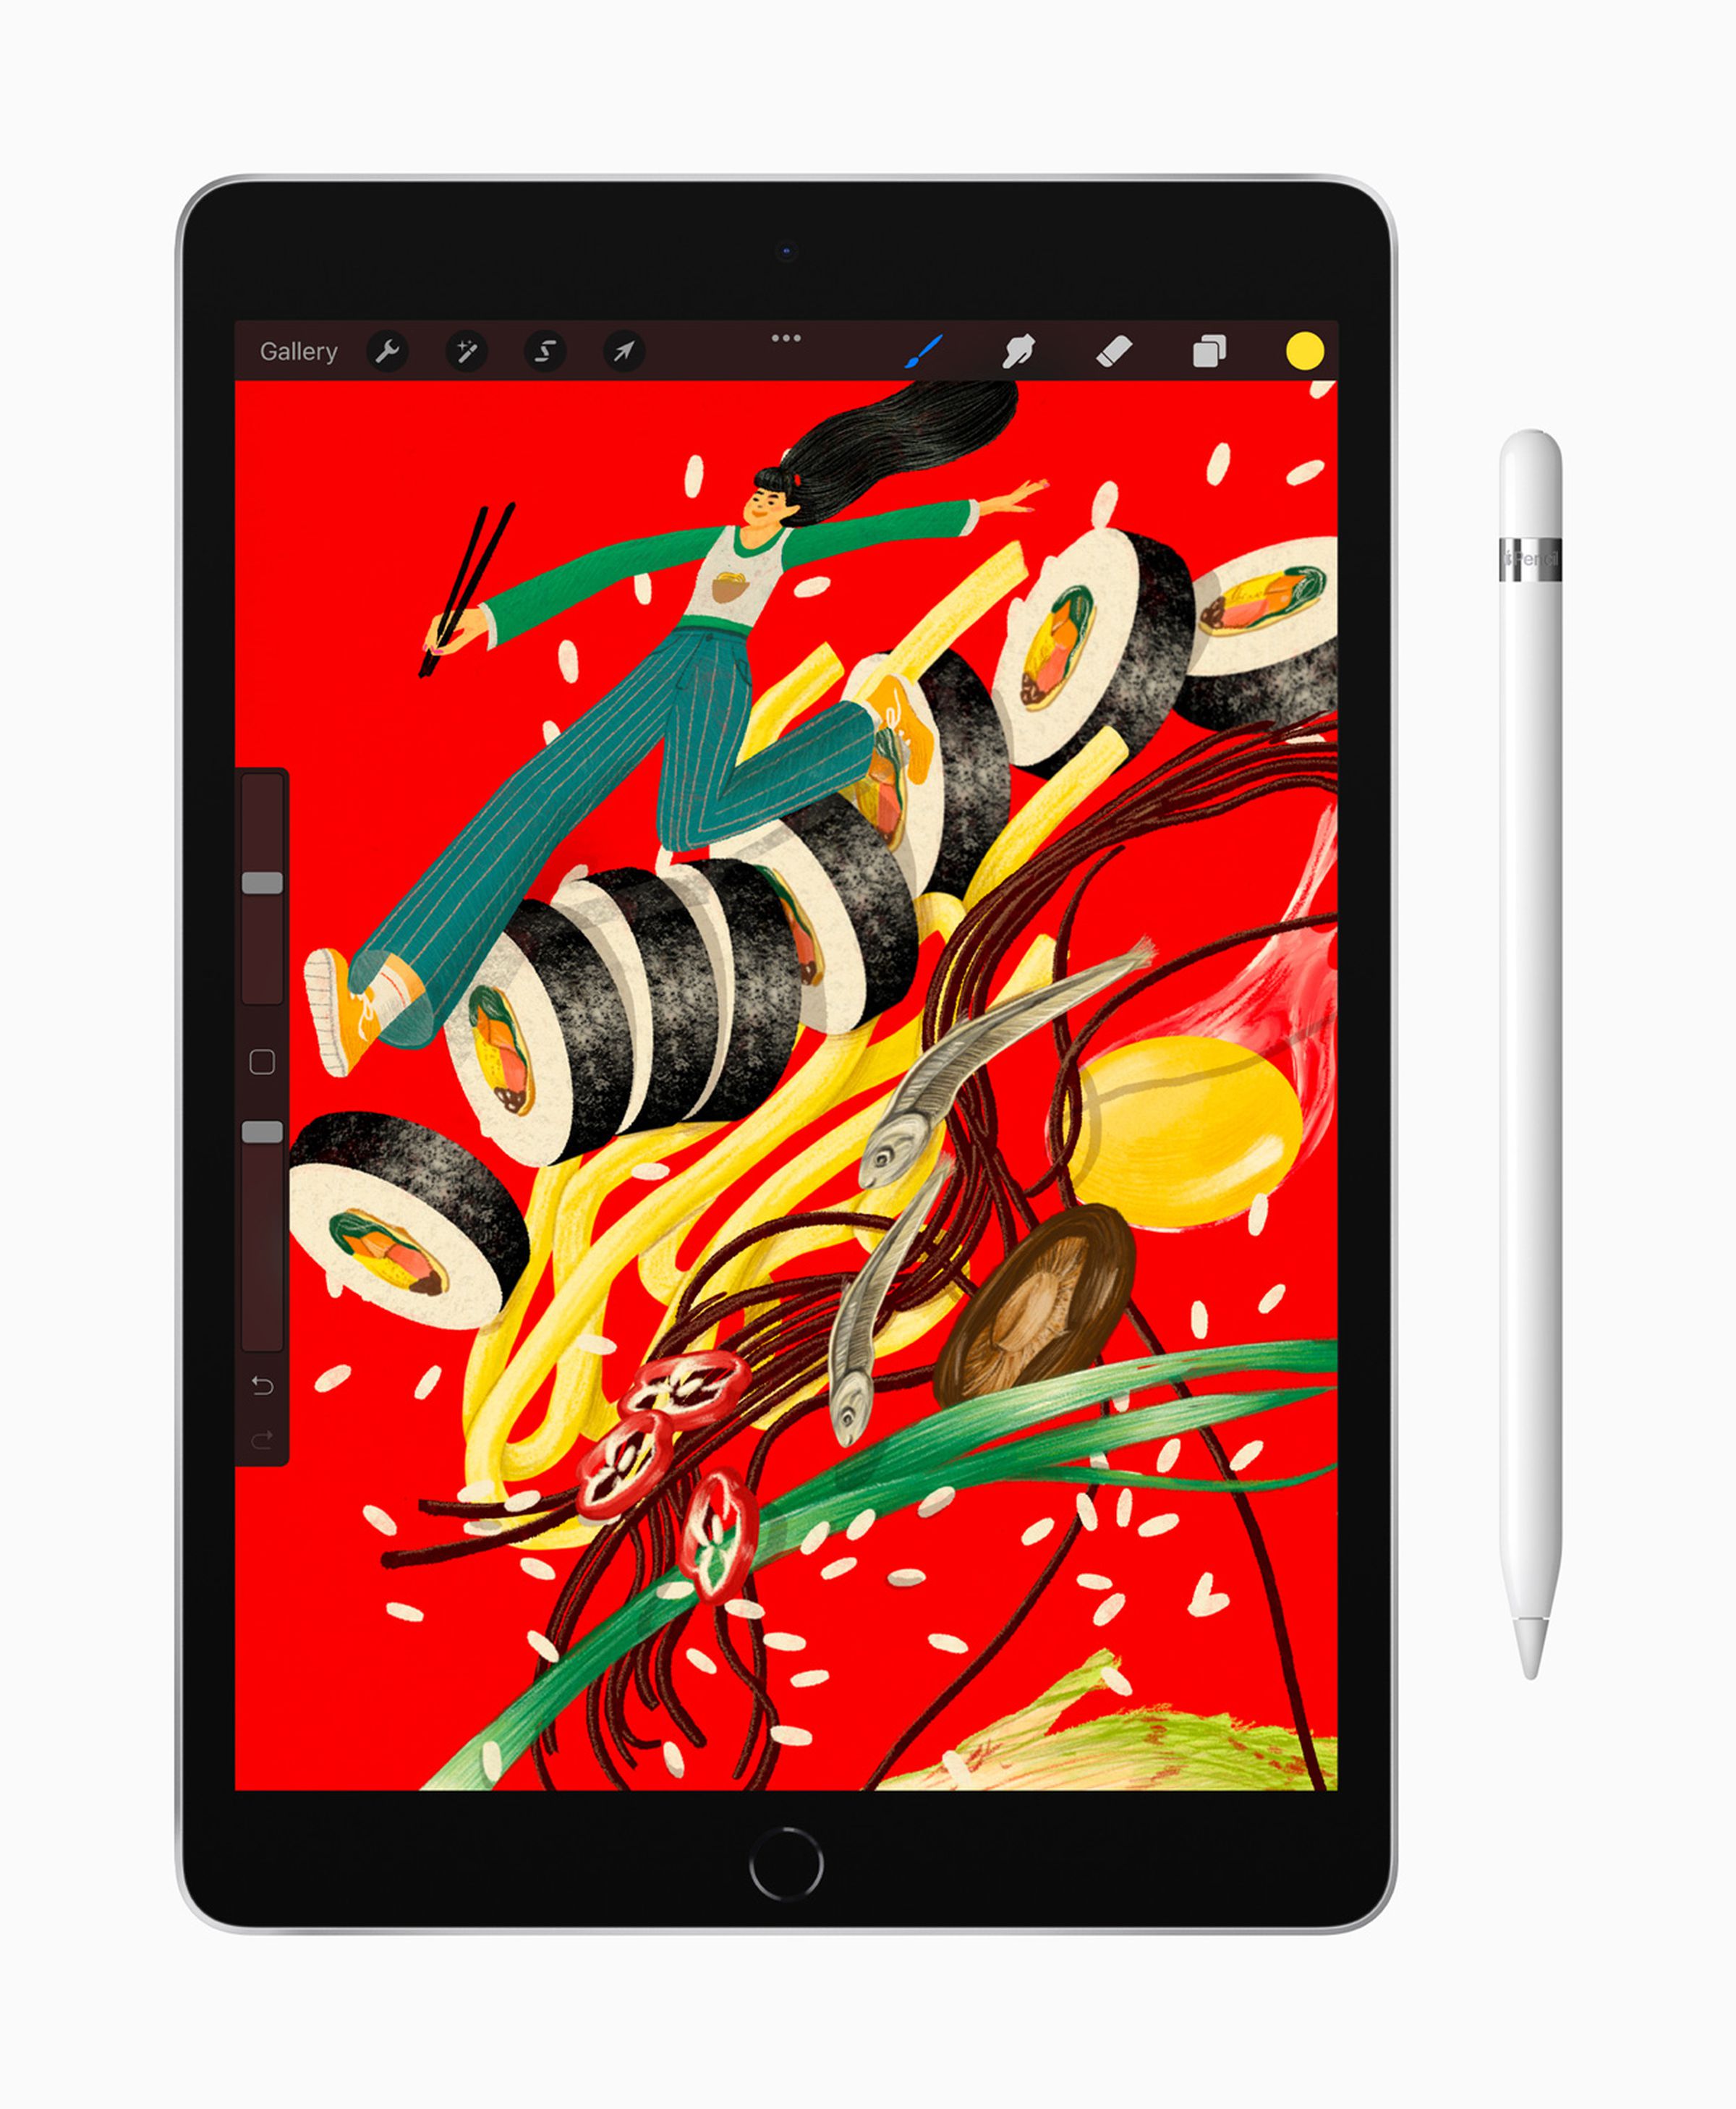 Both the 2020 and 2021 iPad feature an LCD display with 2160 x 1620 resolution.